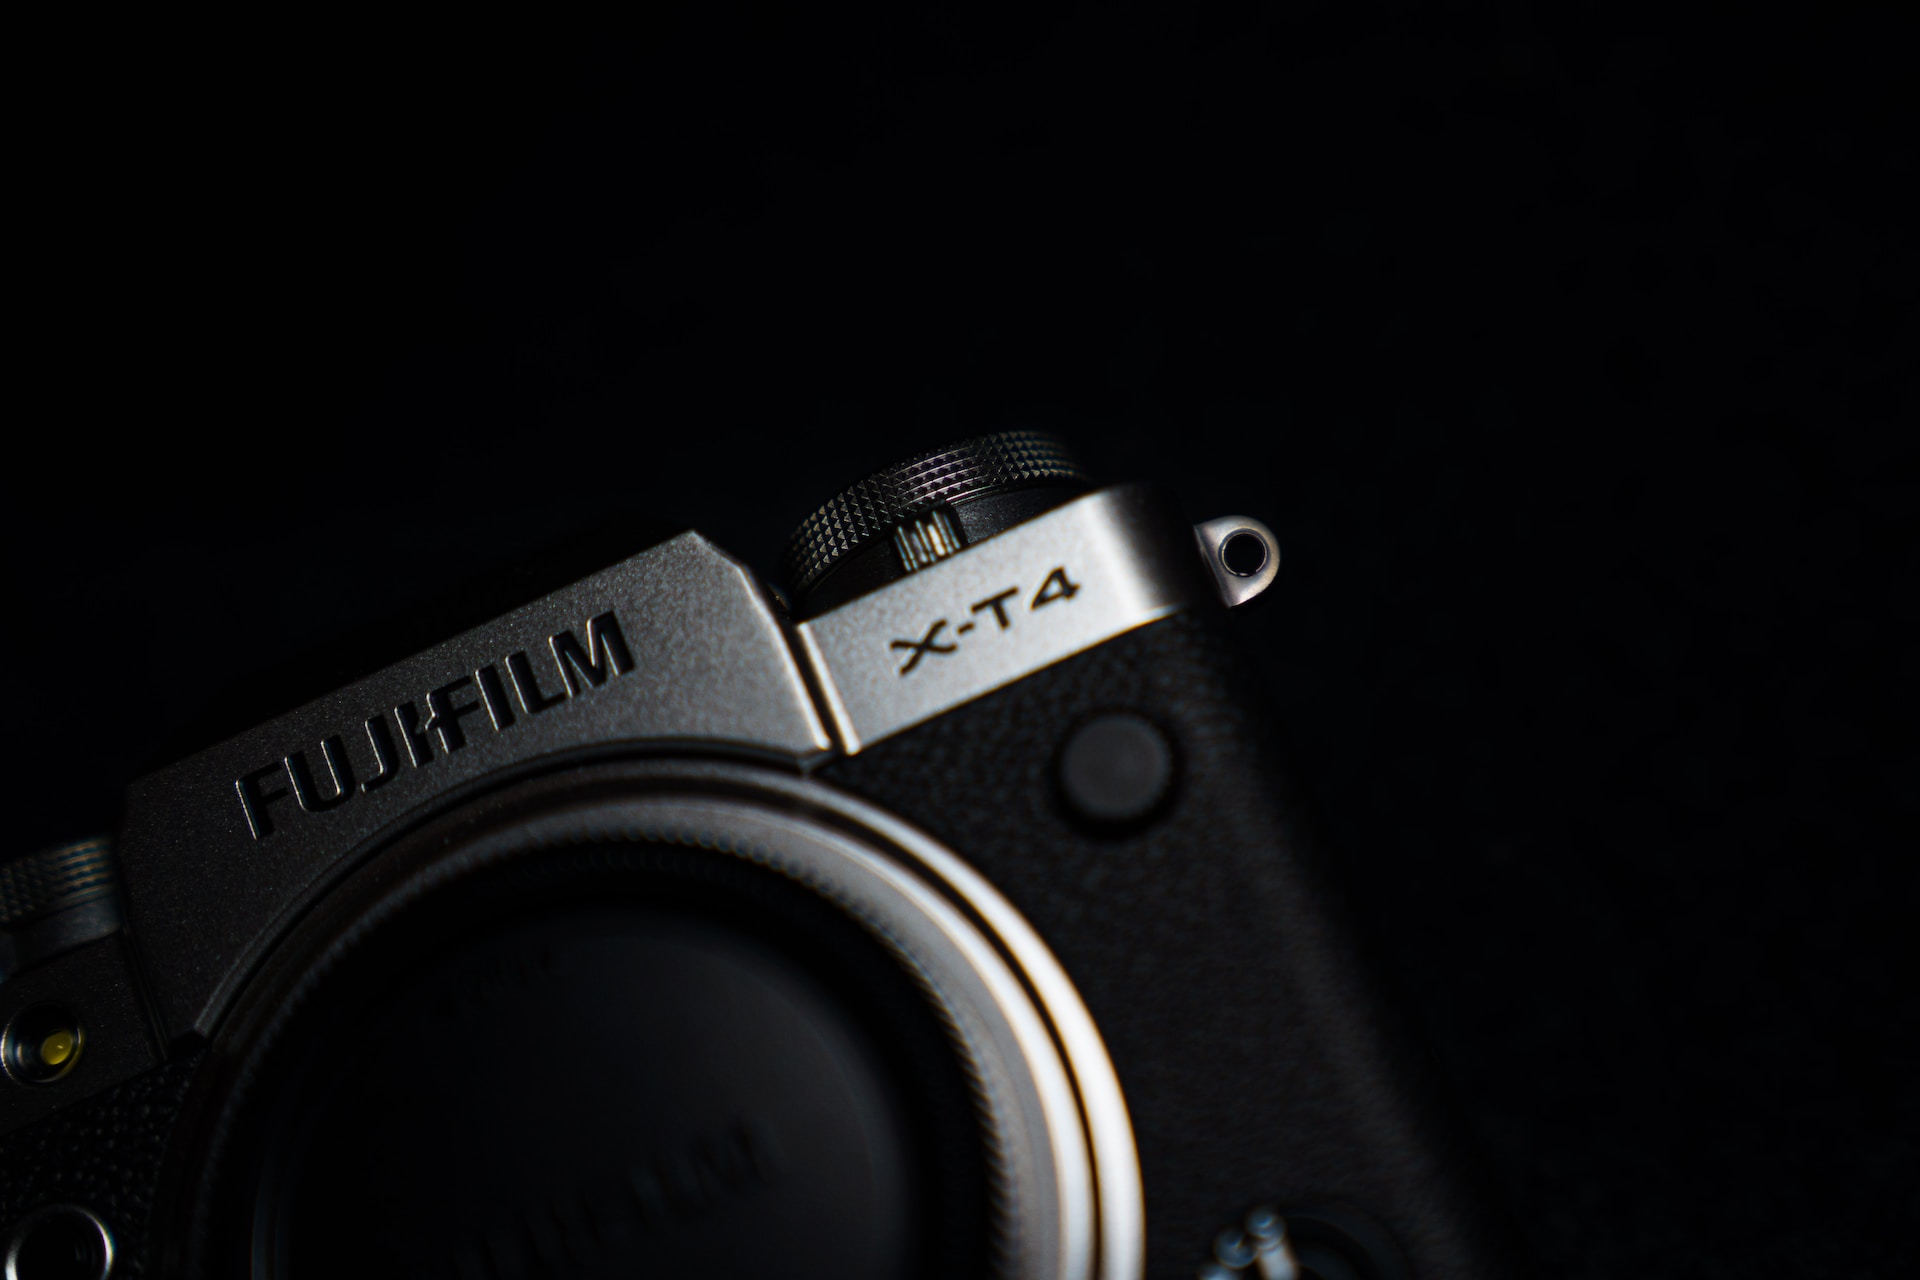 Fujifilm X-T4 Review - What to Know in 2024